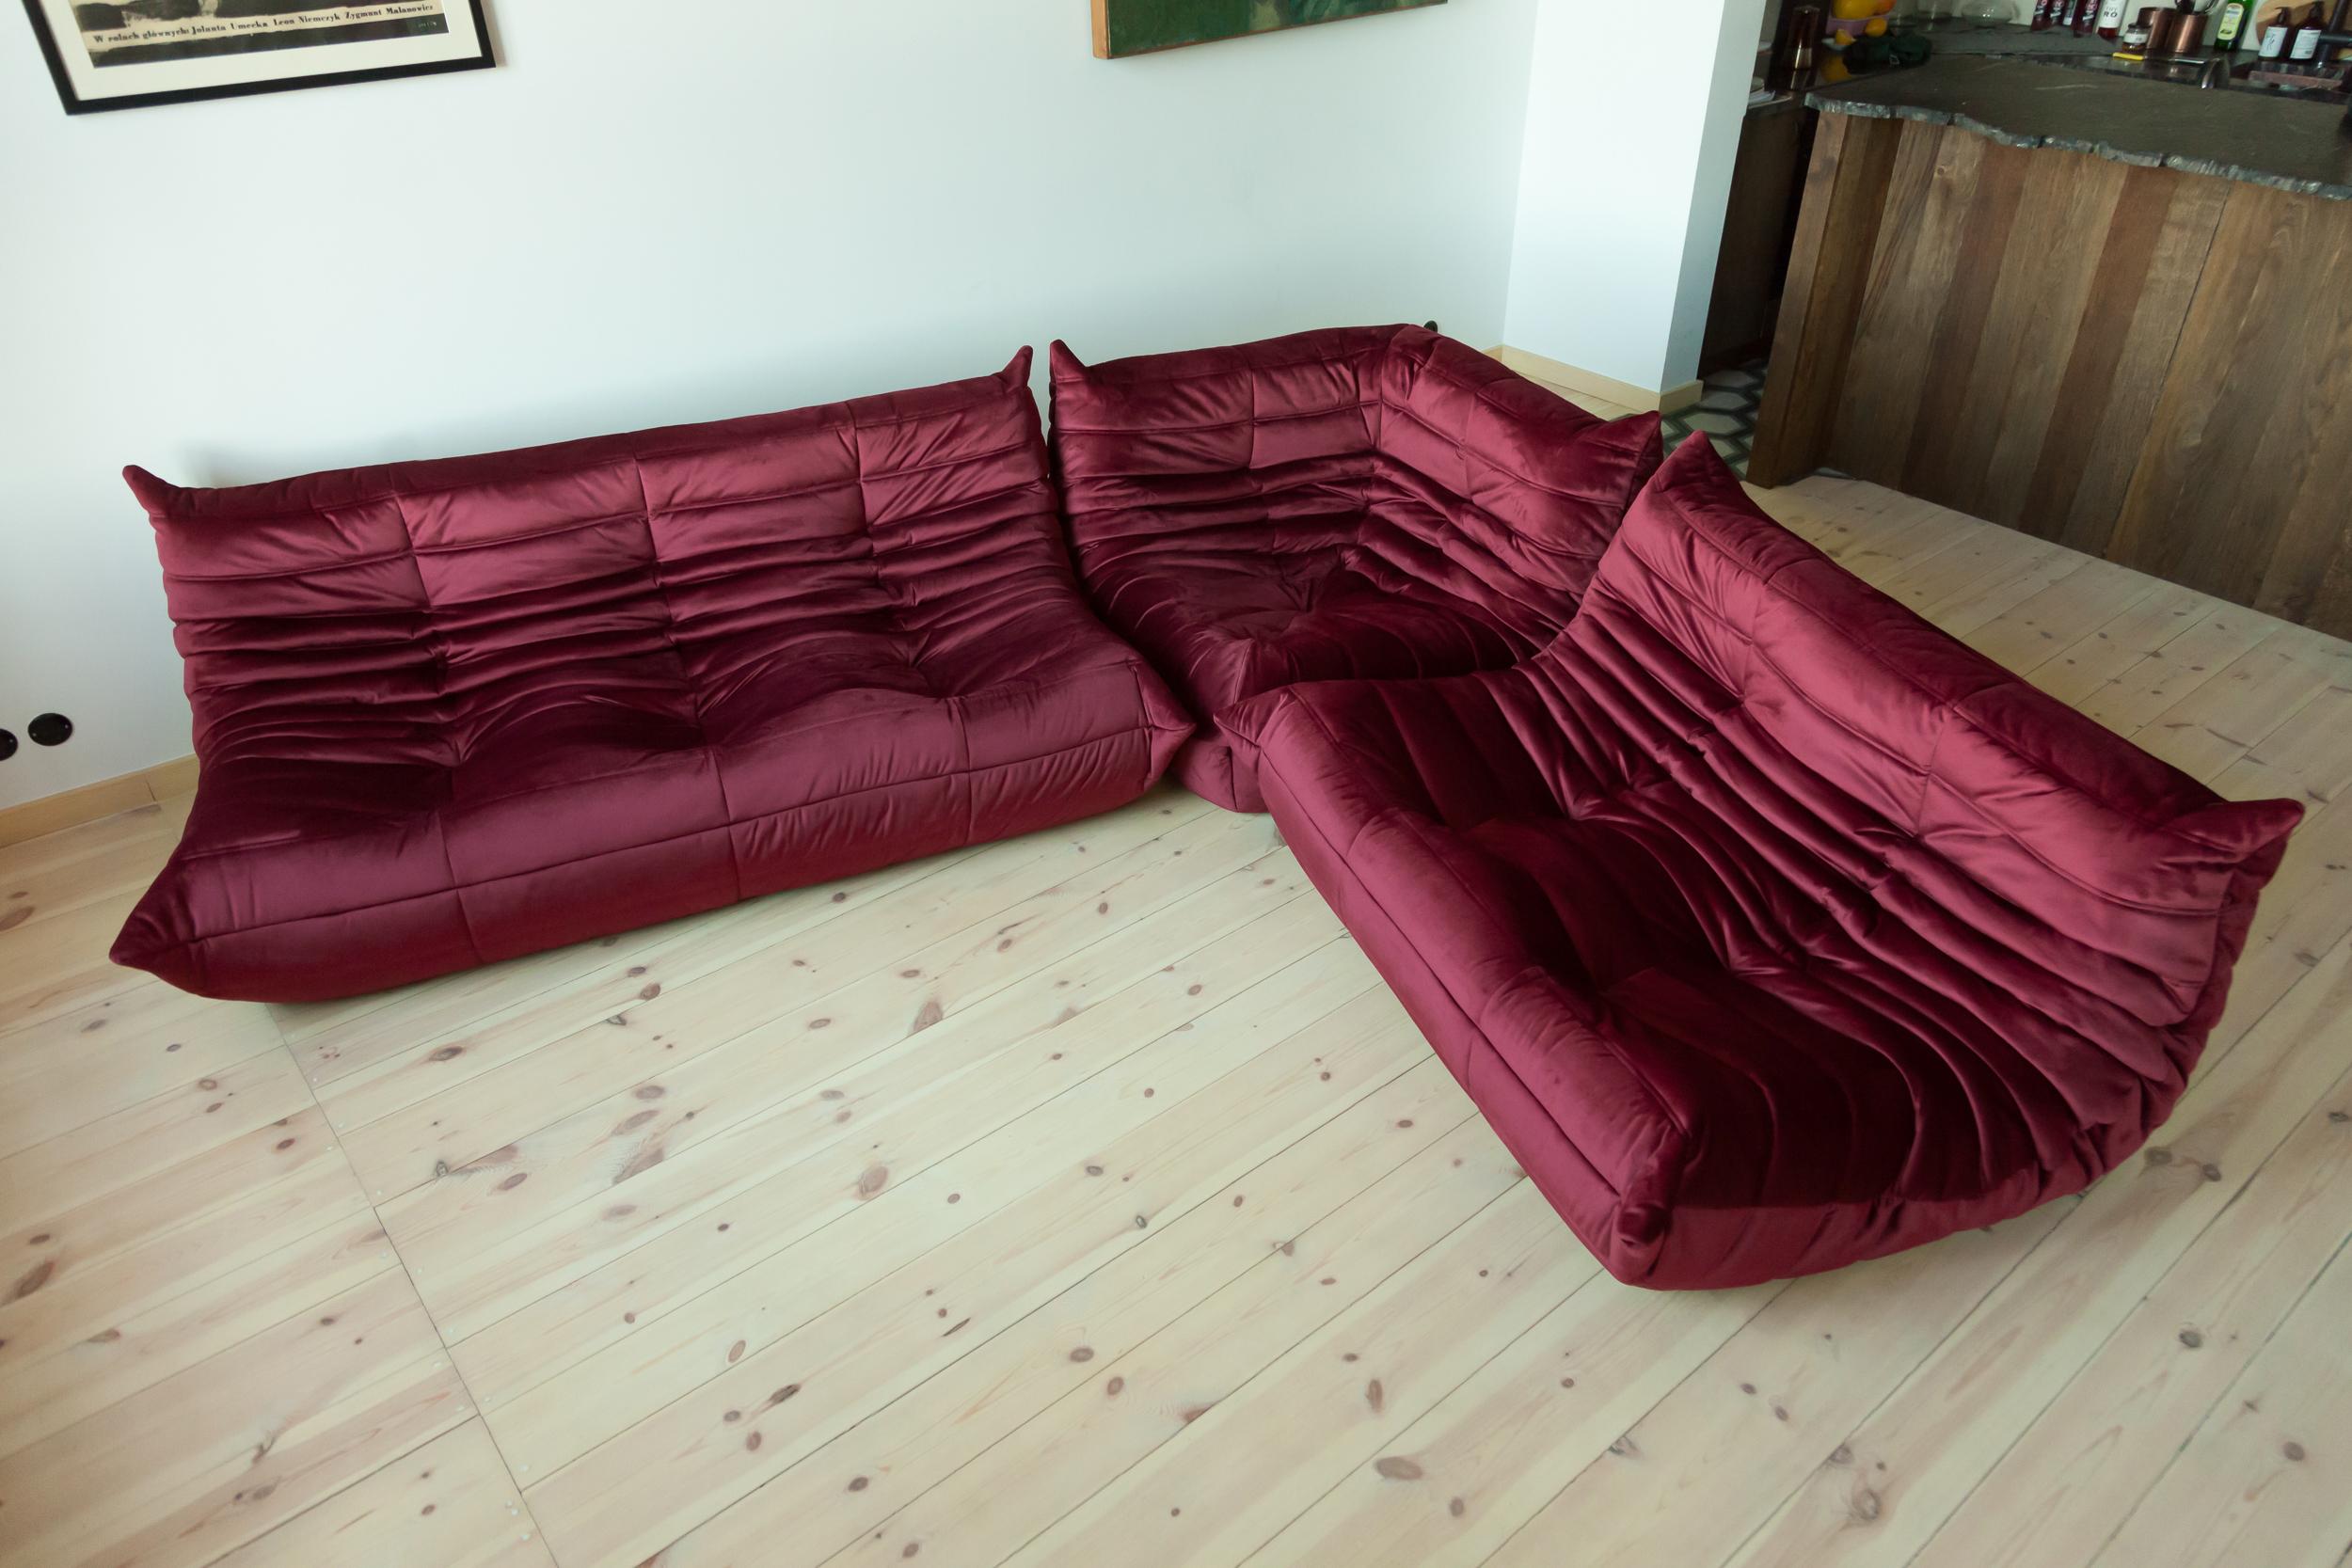 This Togo living room set was designed by Michel Ducaroy in 1973 and was manufactured by Ligne Roset in France. It has been reupholstered in high quality burgundy velvet and is made up of the following pieces, each with the original Ligne Roset logo